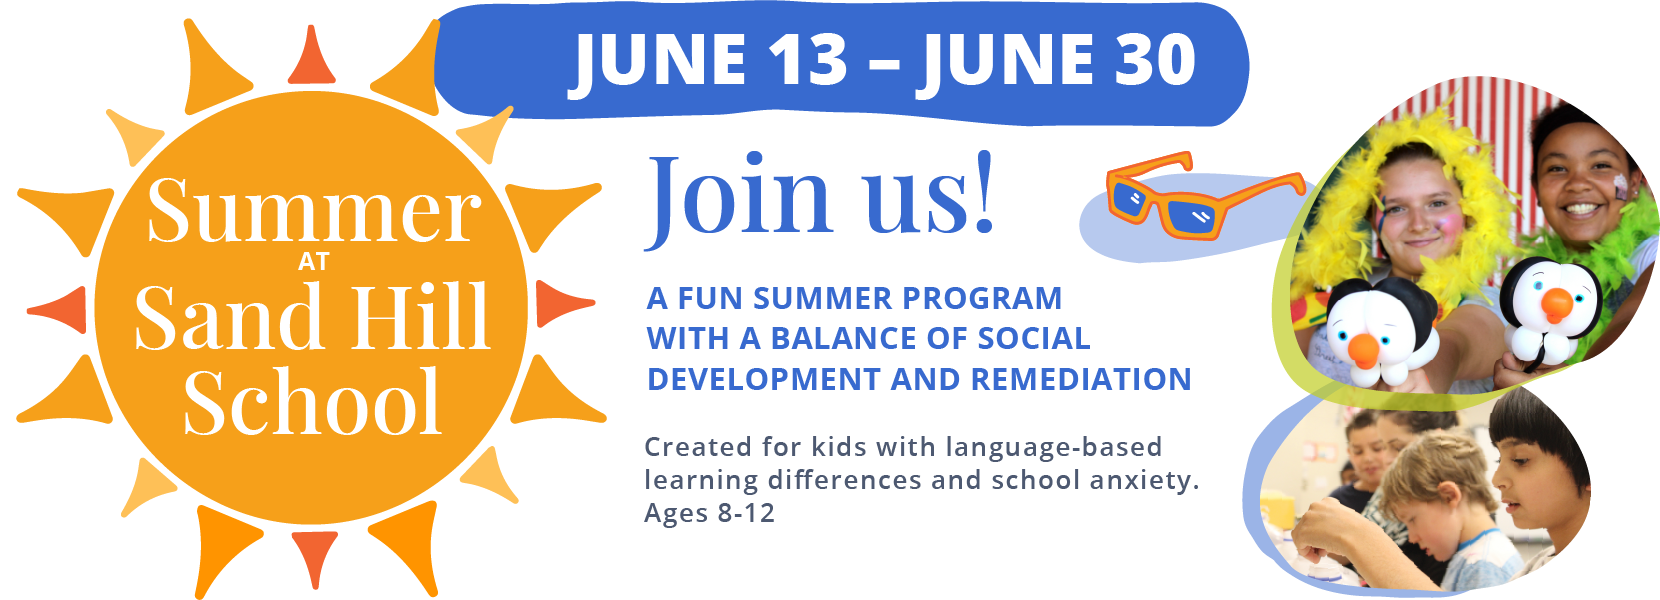 Summer at Sand Hill School. June 13 - June 30. Join us! A fun summer program with a balance of social development and remediation. Created for kids with language-based learning differences and school anxiety. Ages 8-12